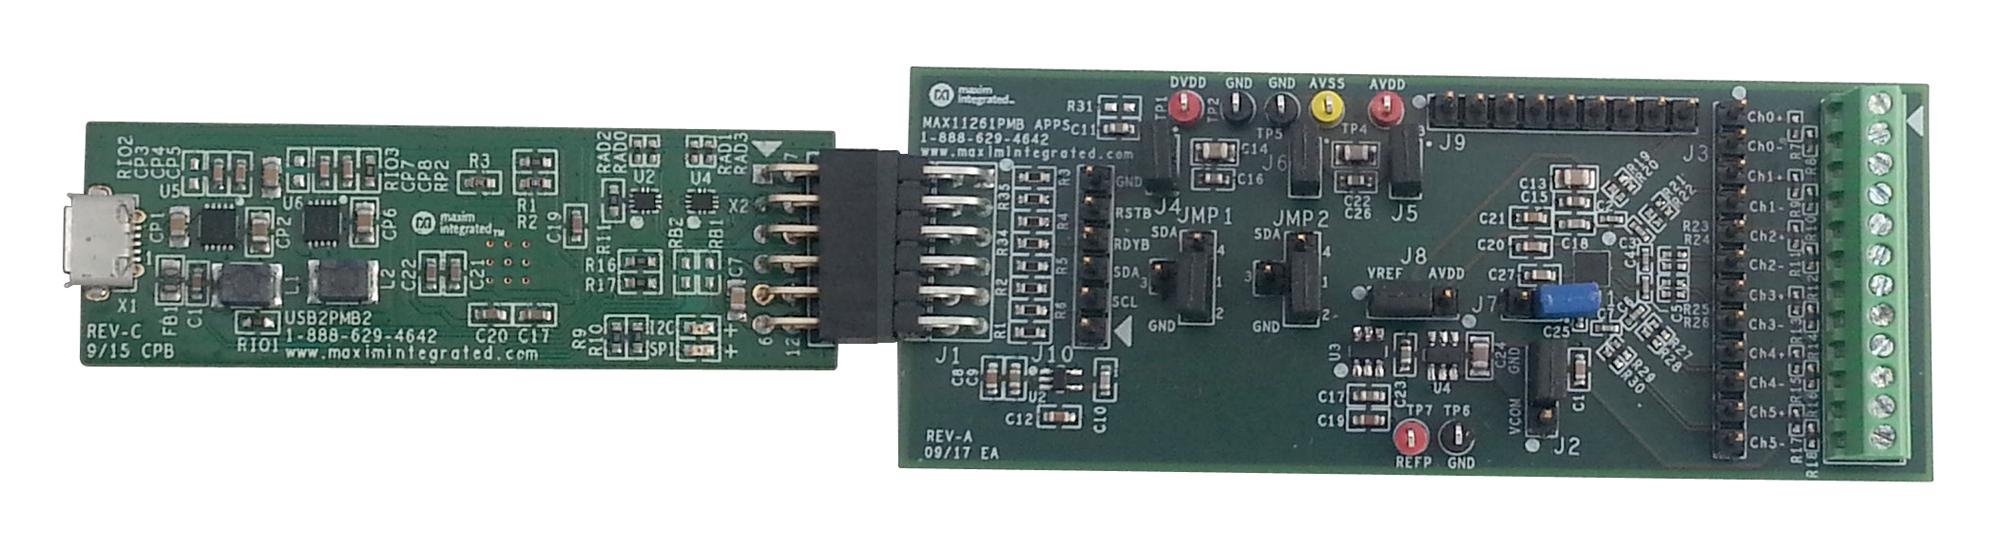 MAX11261SYS1# EVAL KIT, DELTA-SIGMA ADC, 24BIT, 16KSPS MAXIM INTEGRATED / ANALOG DEVICES